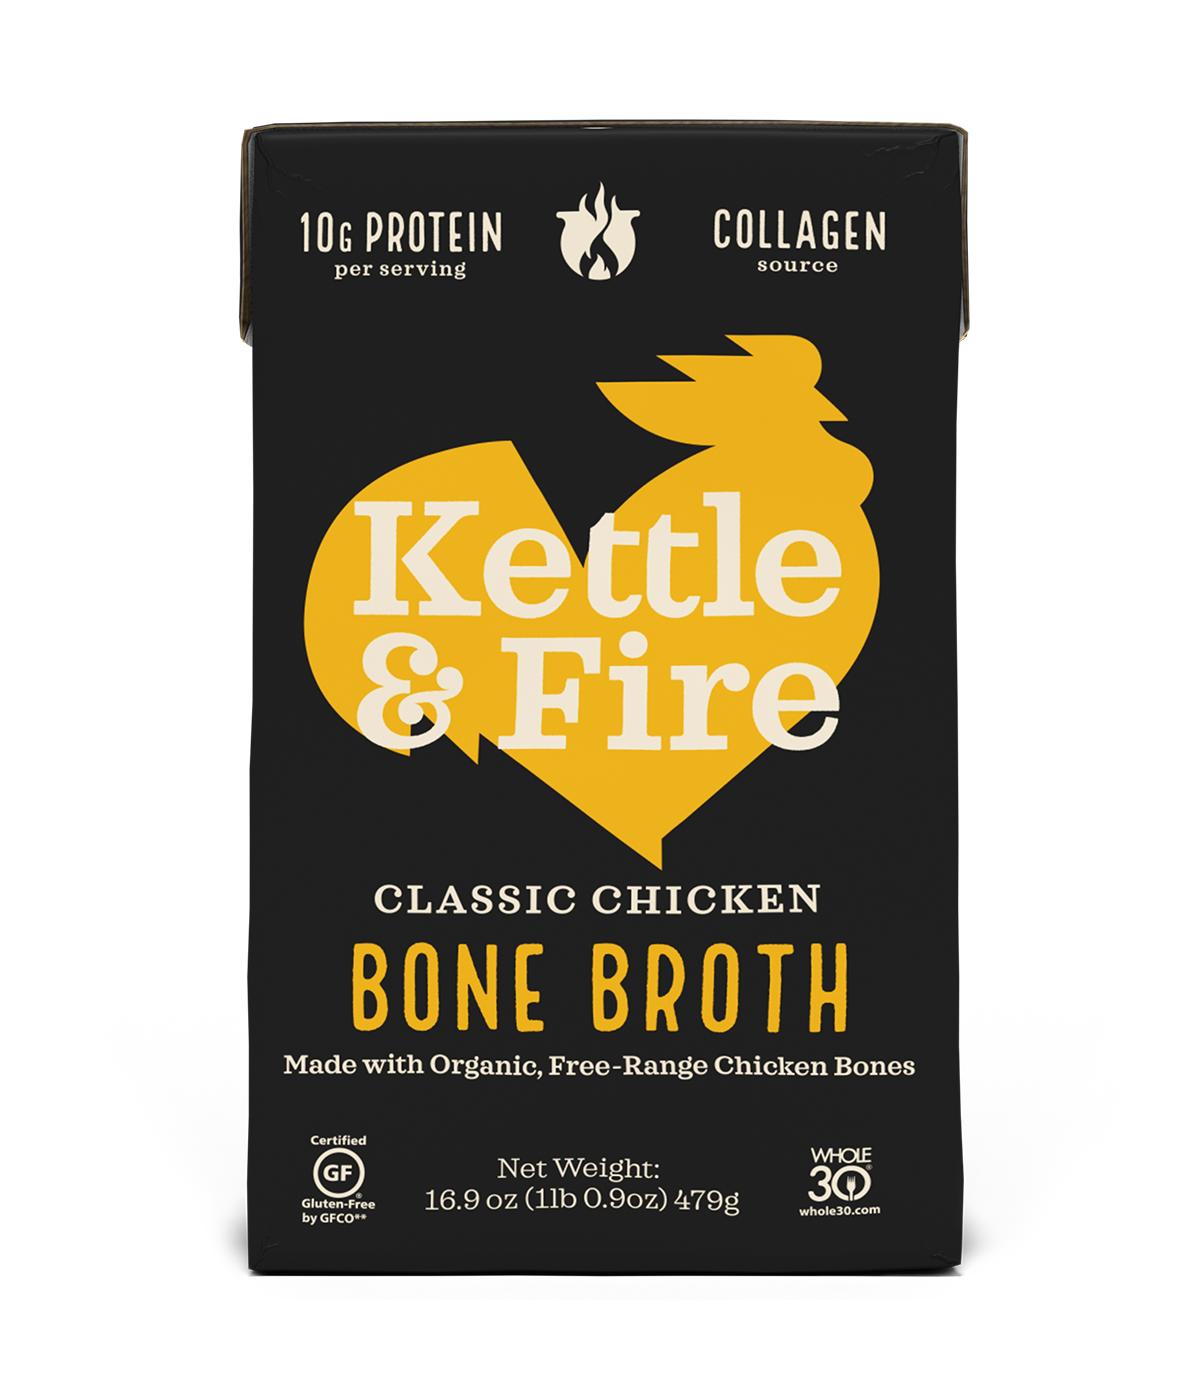 Kettle & Fire Classic Chicken Bone Broth; image 1 of 2